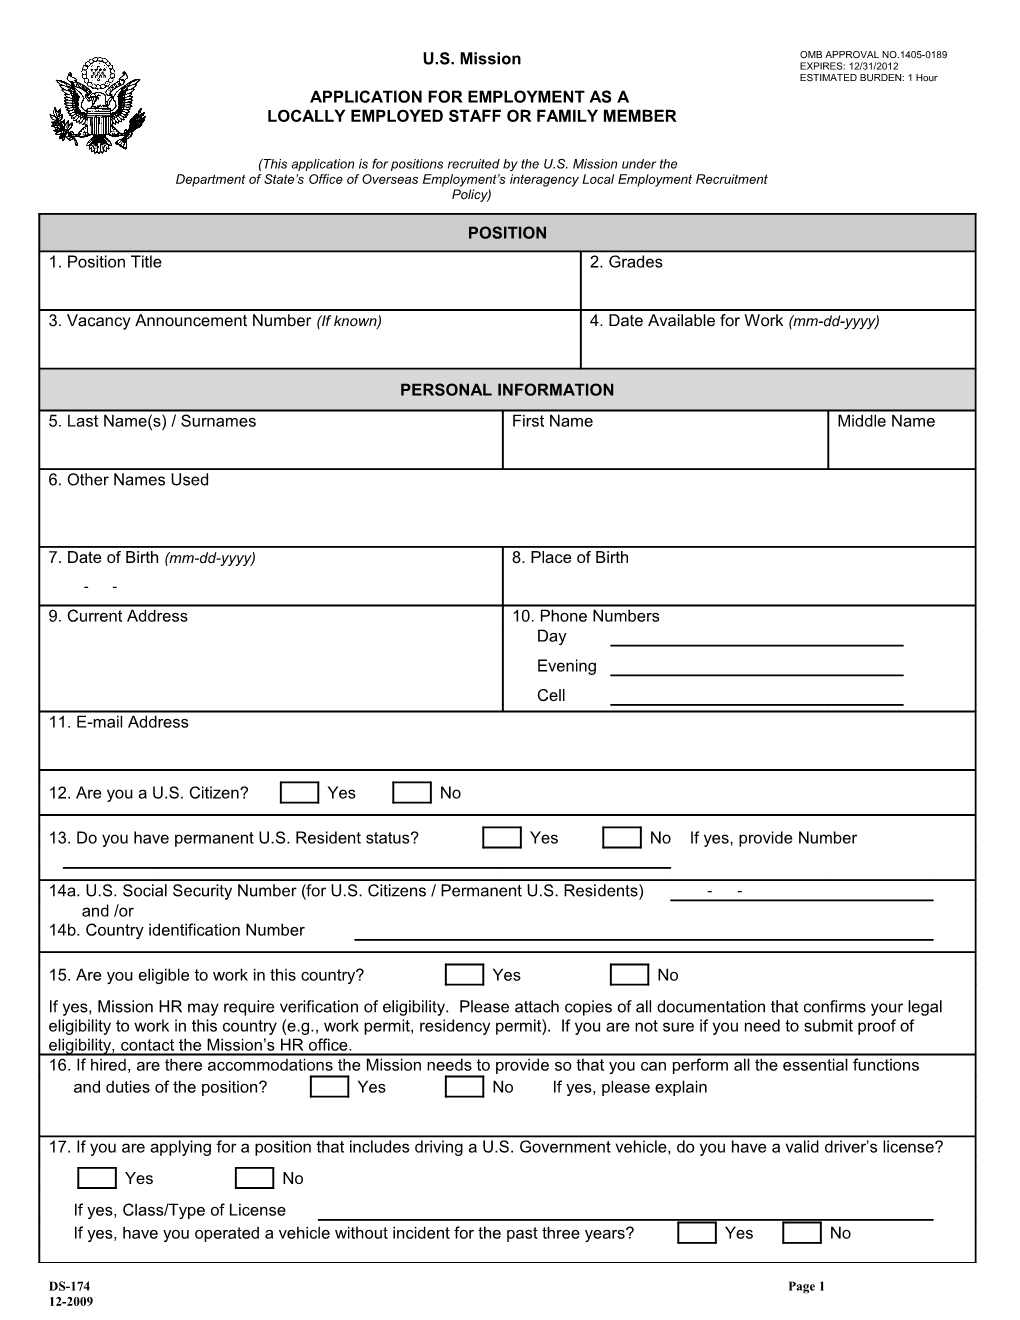 U.S. Mission APPLICATION for EMPLOYMENT AS a LOCALLY EMPLOYED STAFF OR FAMILY MEMBER (This